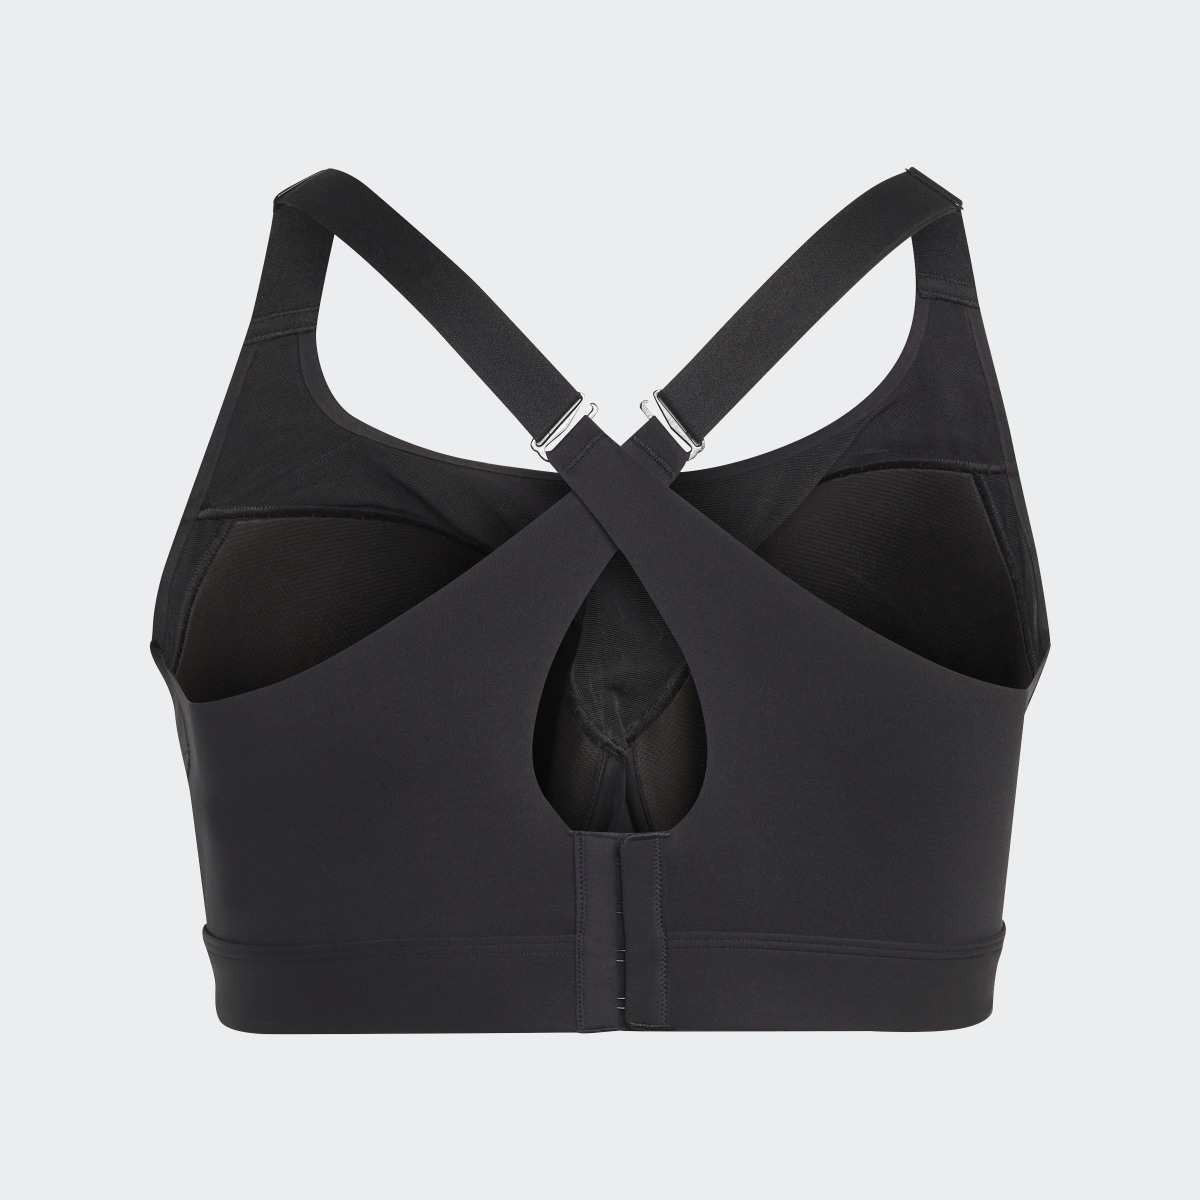 Adidas Brassière de training Tailored Impact Luxe Training Maintien fort (Grandes tailles). 8